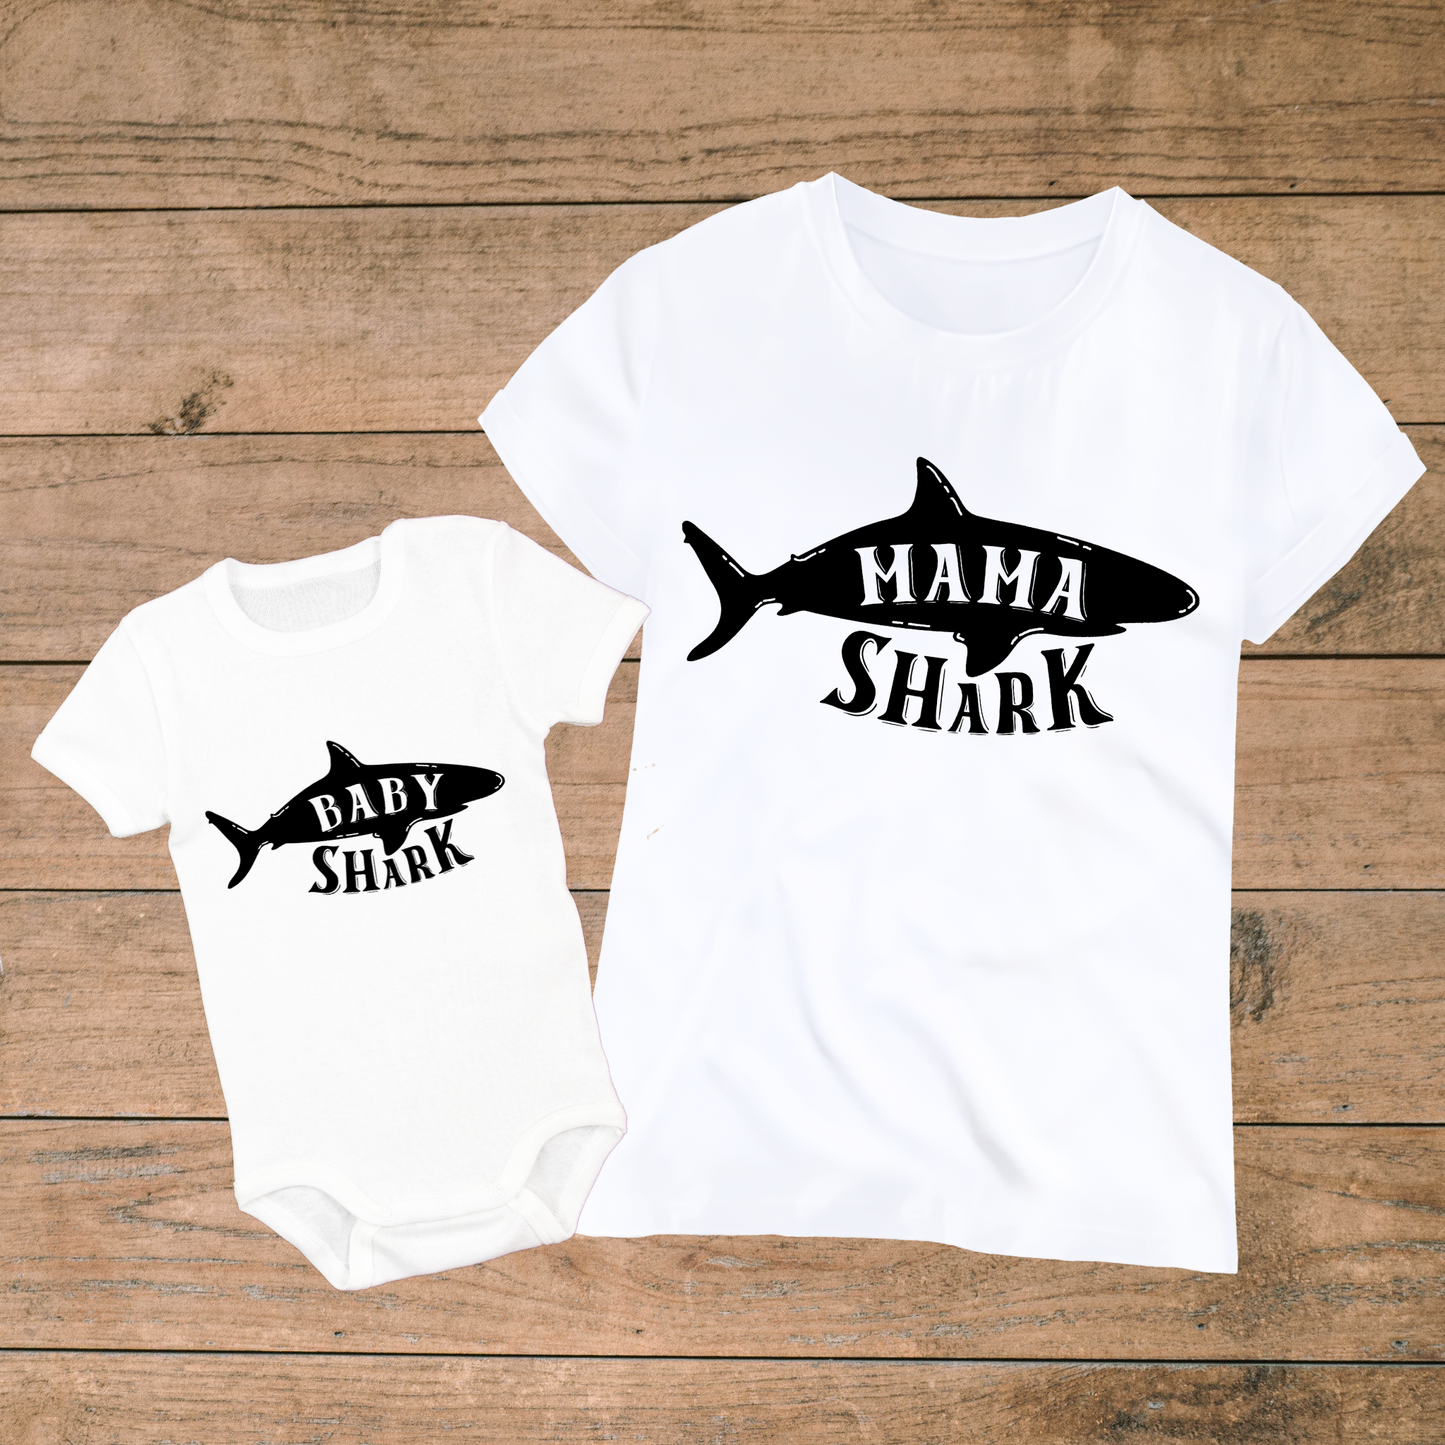 Mama & Baby Shark - Mommy and Me Outfits